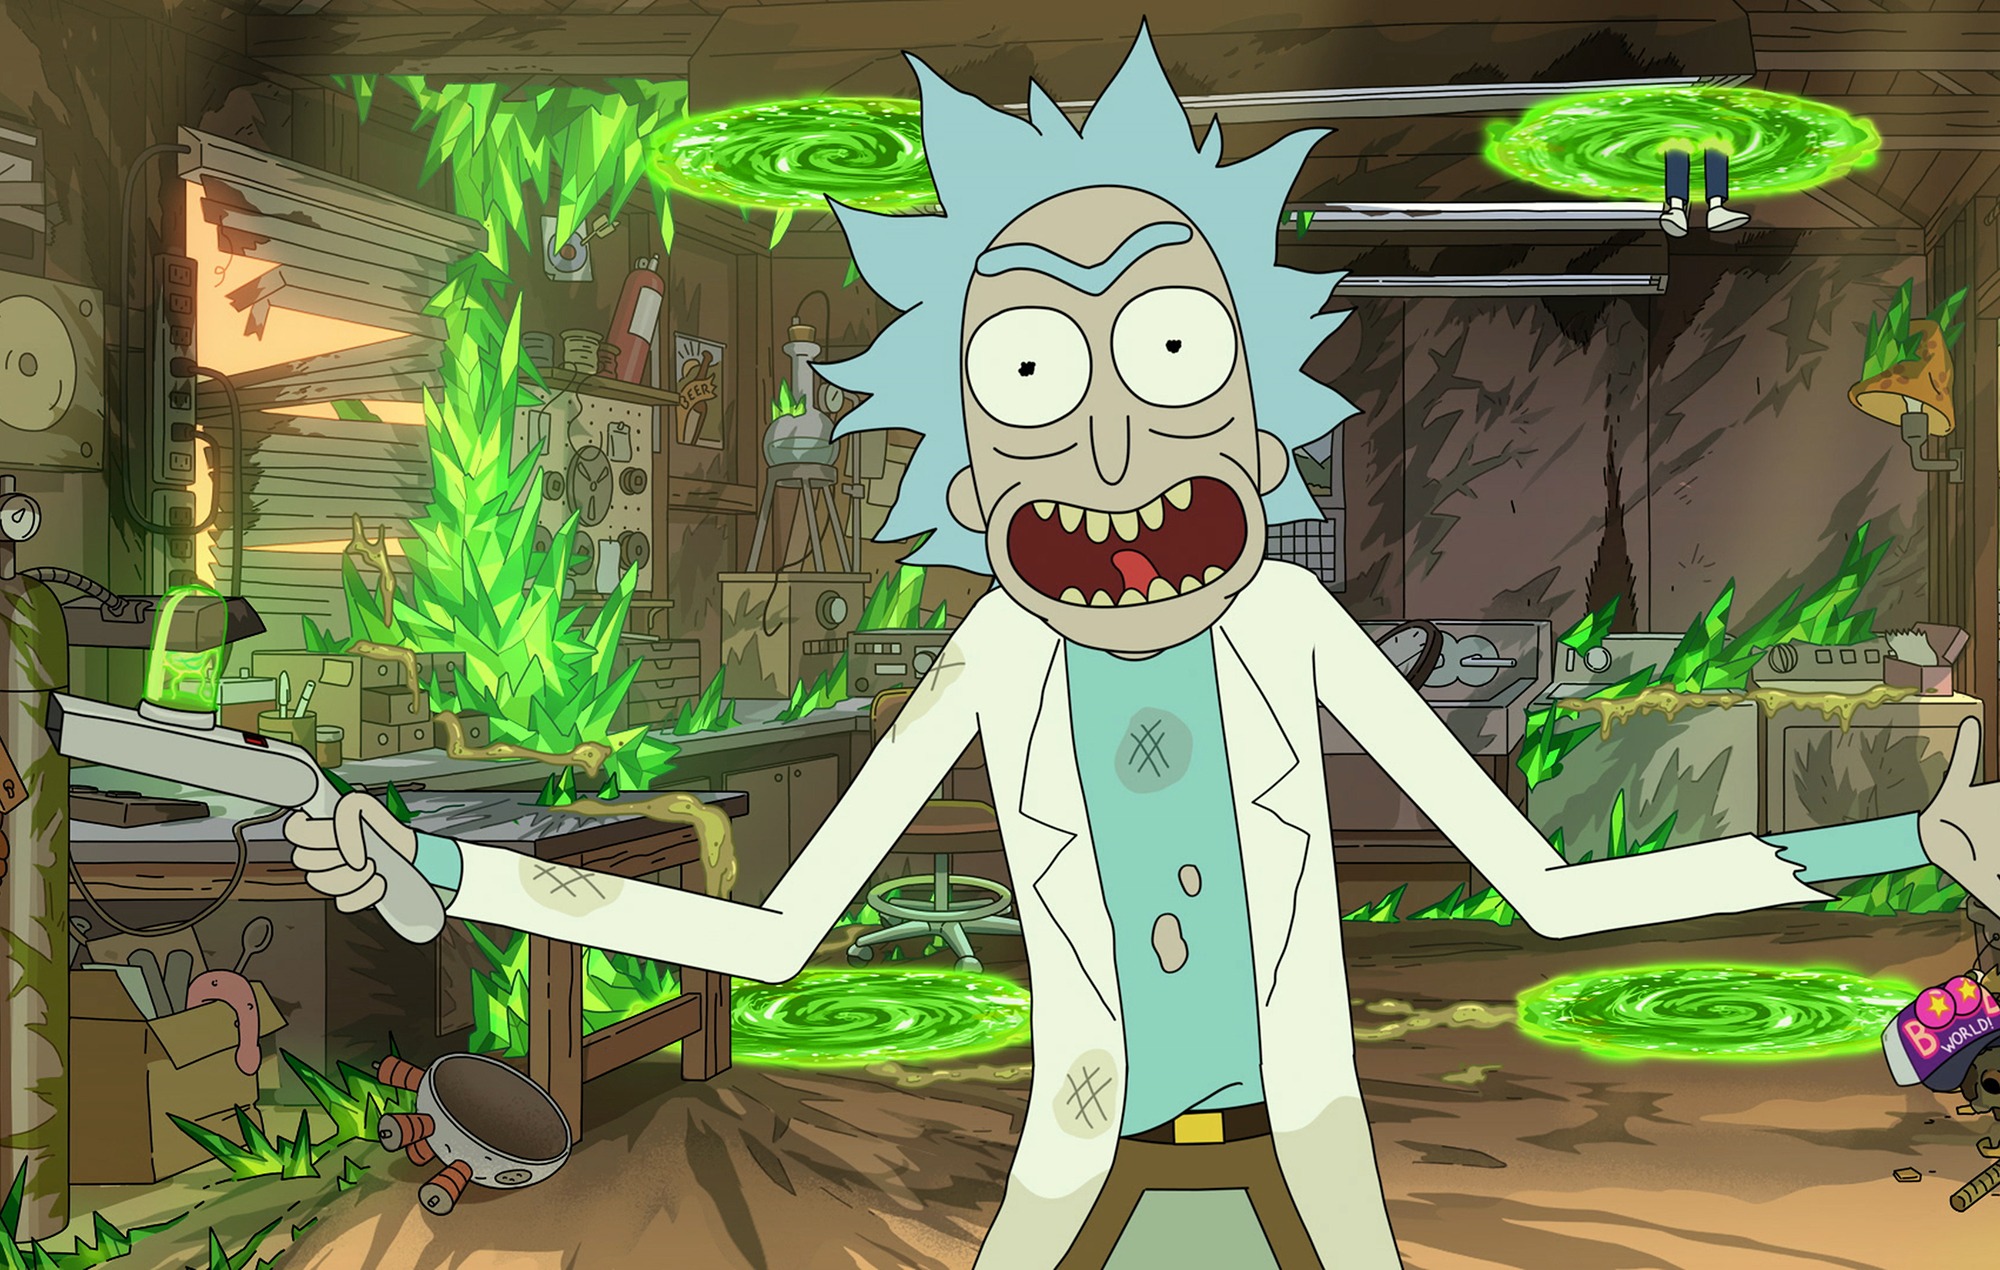 #Rick and Morty: Adult Swim Series Co-Creator Justin Roiland’s Roles Being Recast Despite His Being Cleared